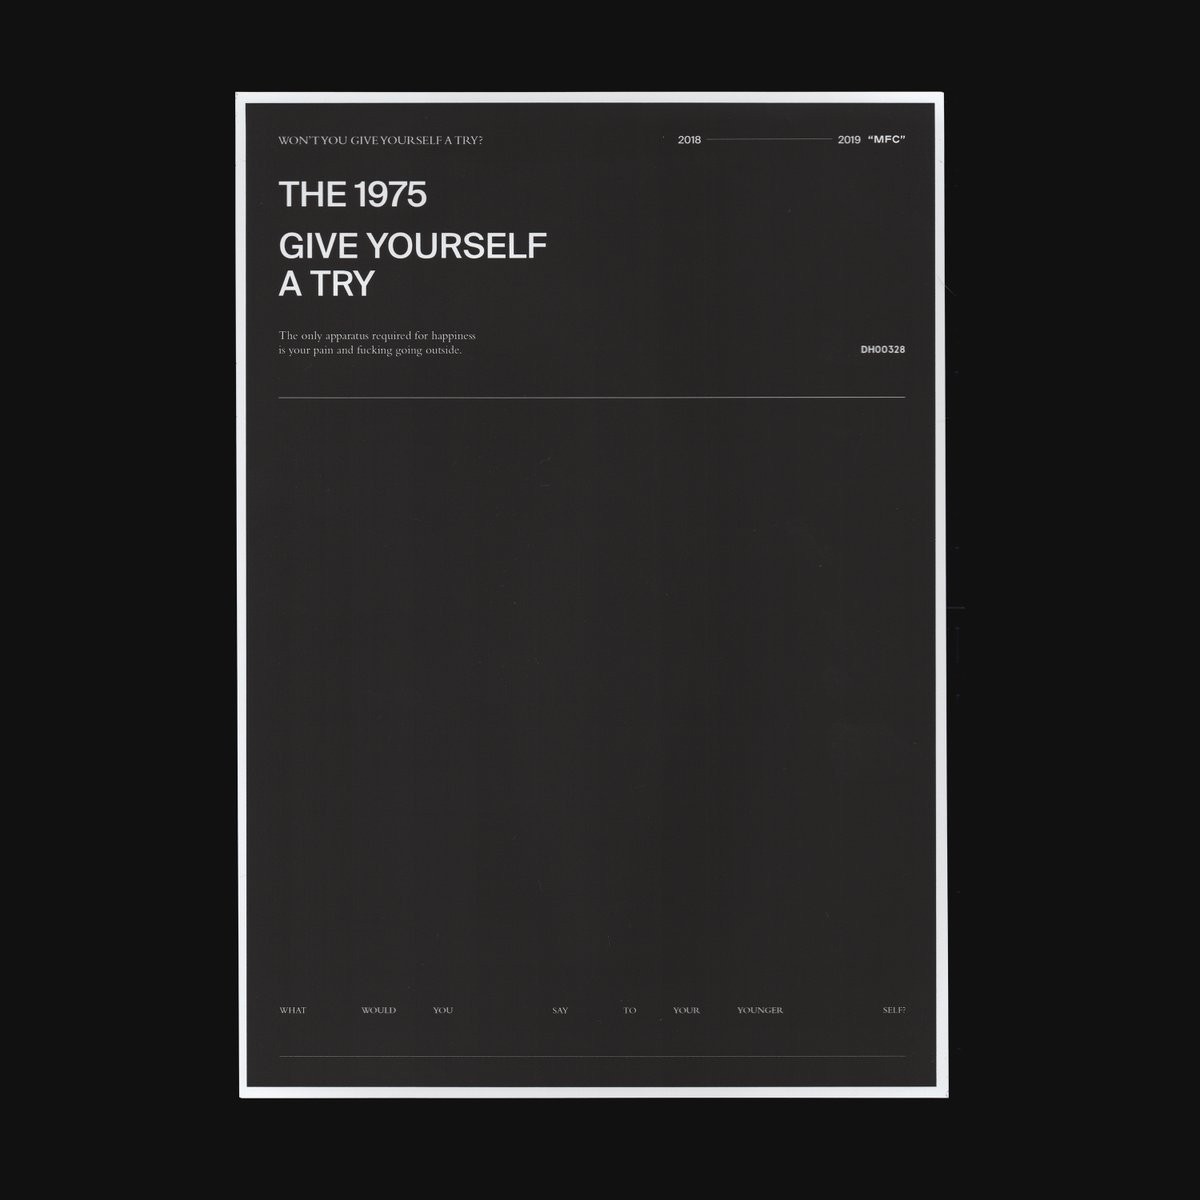 Give Yourself a Try - The 1975